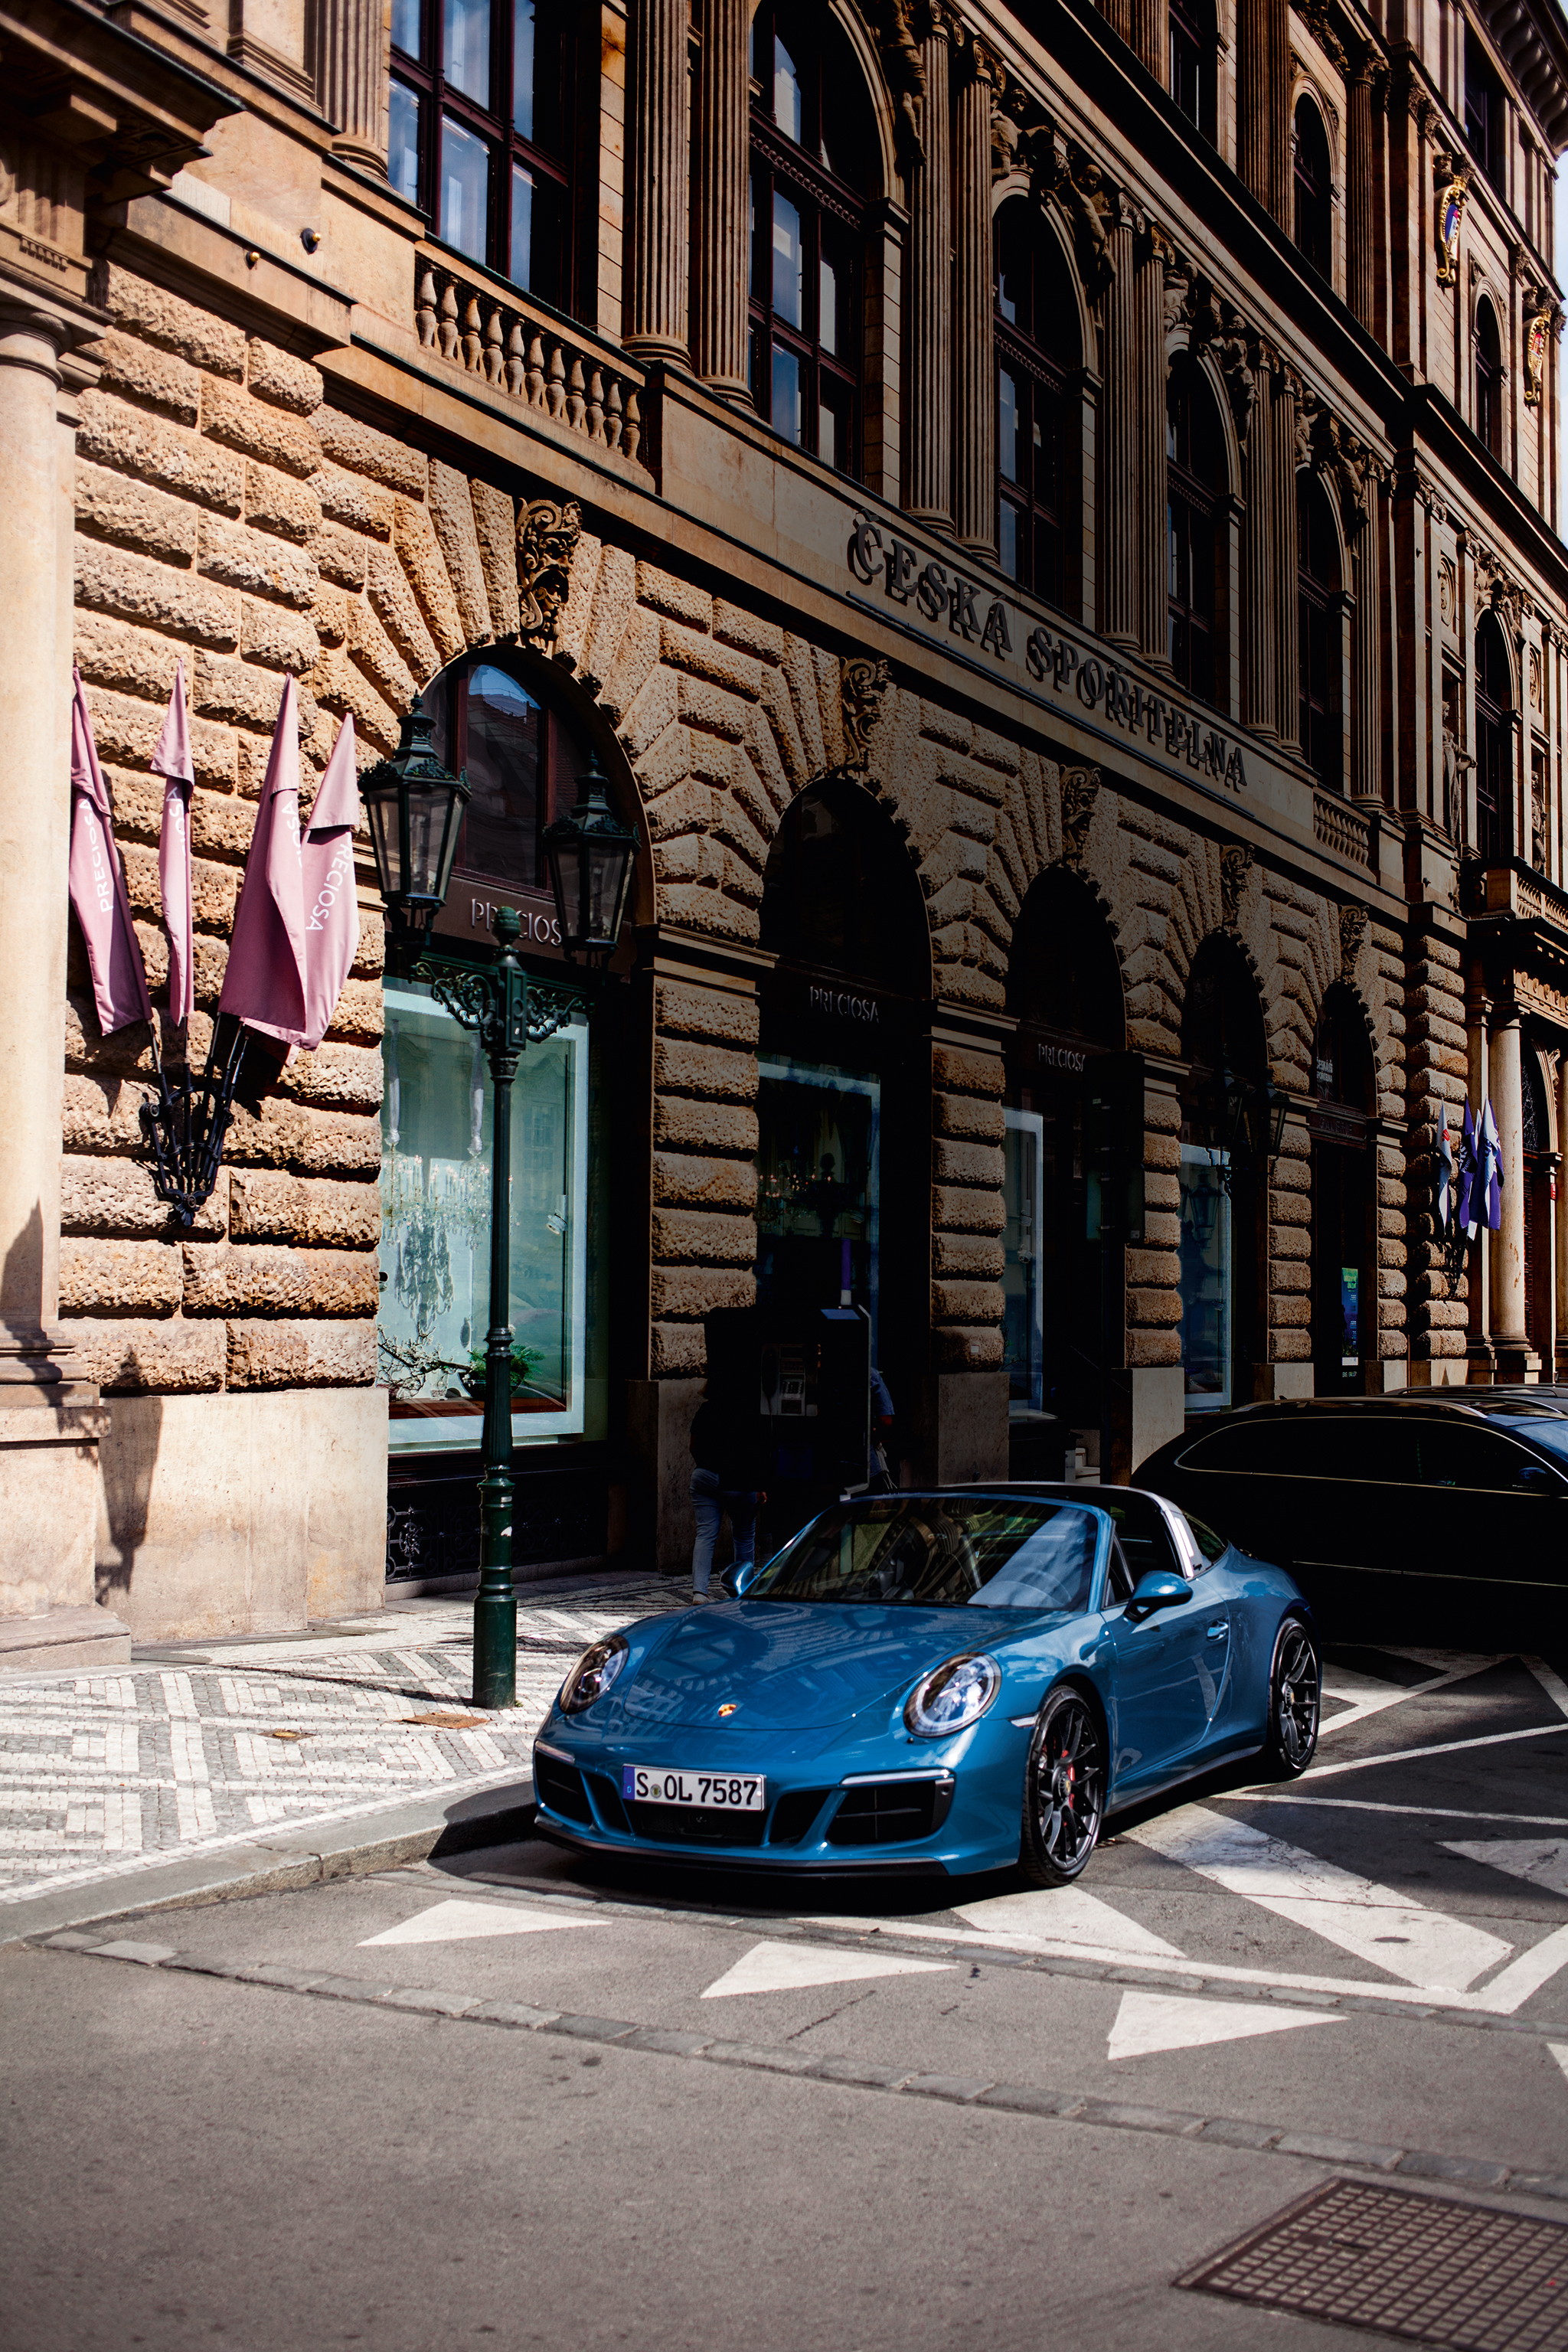 Opposites attract – a modern Porsche in front of an impressive old building